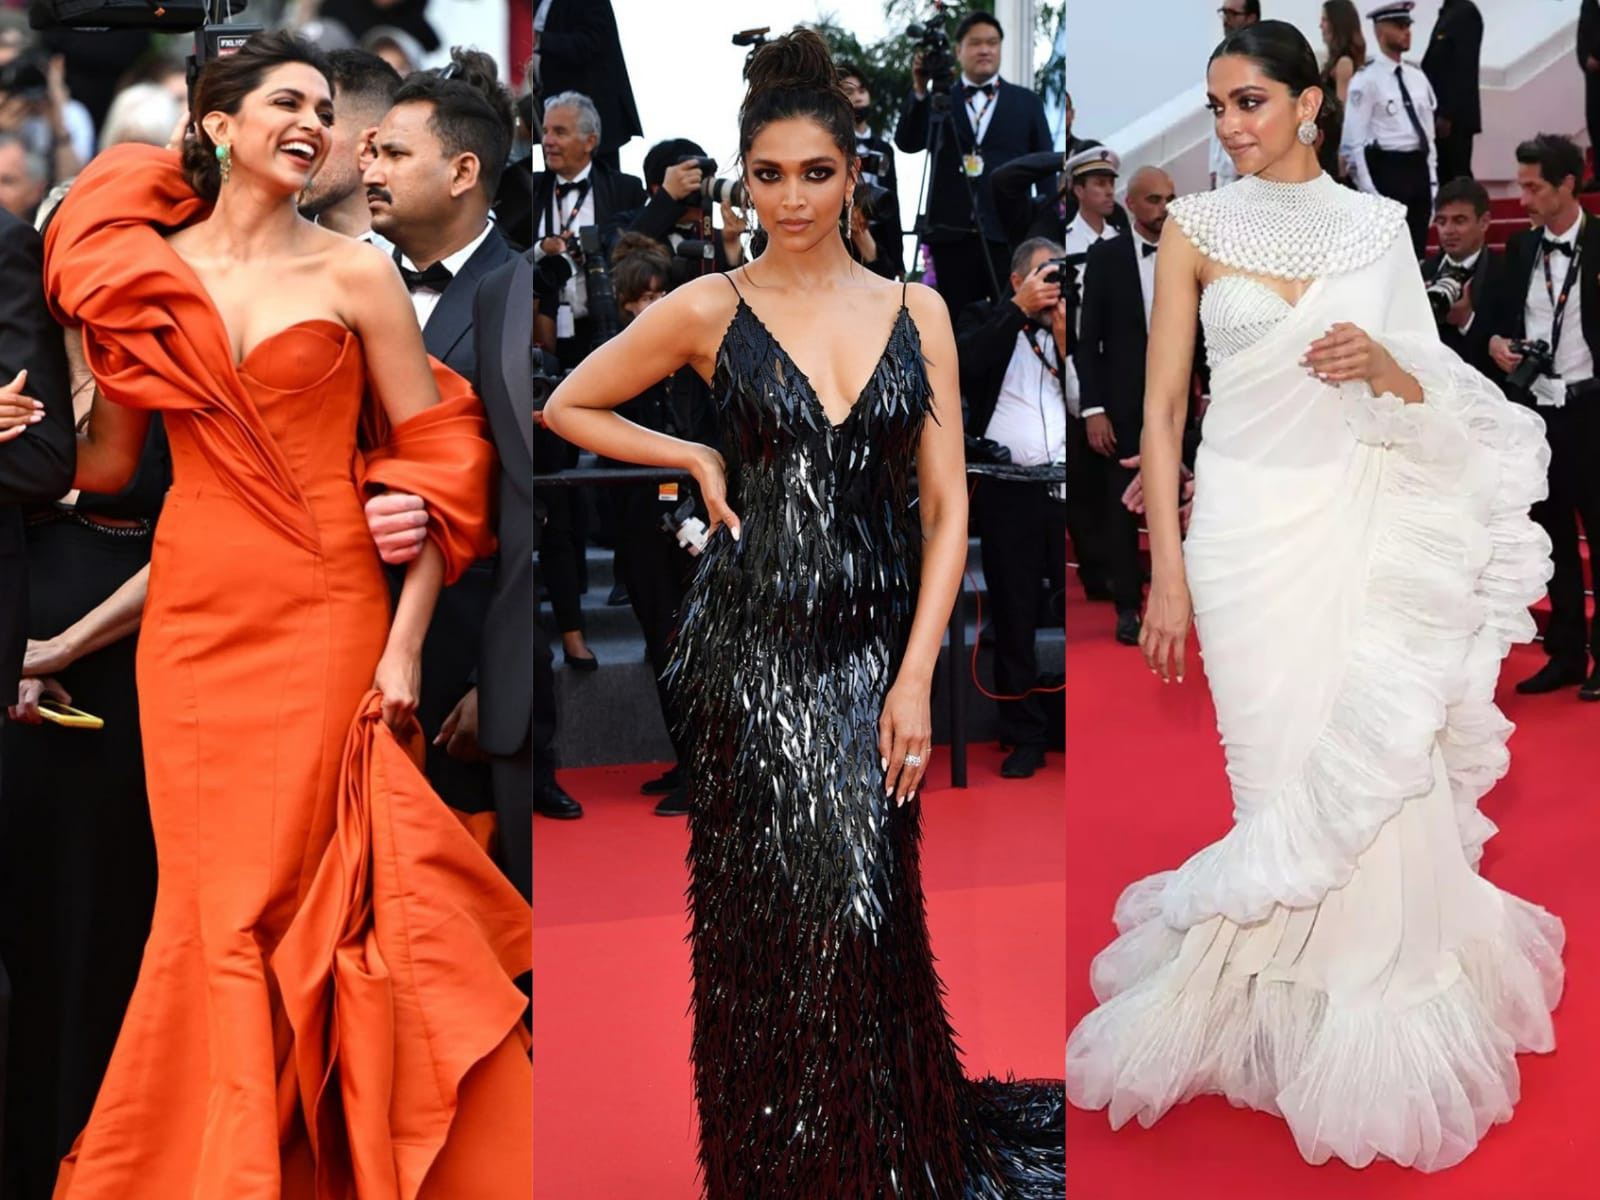 Cannes Film Festival 12 famous Indian artists who attended